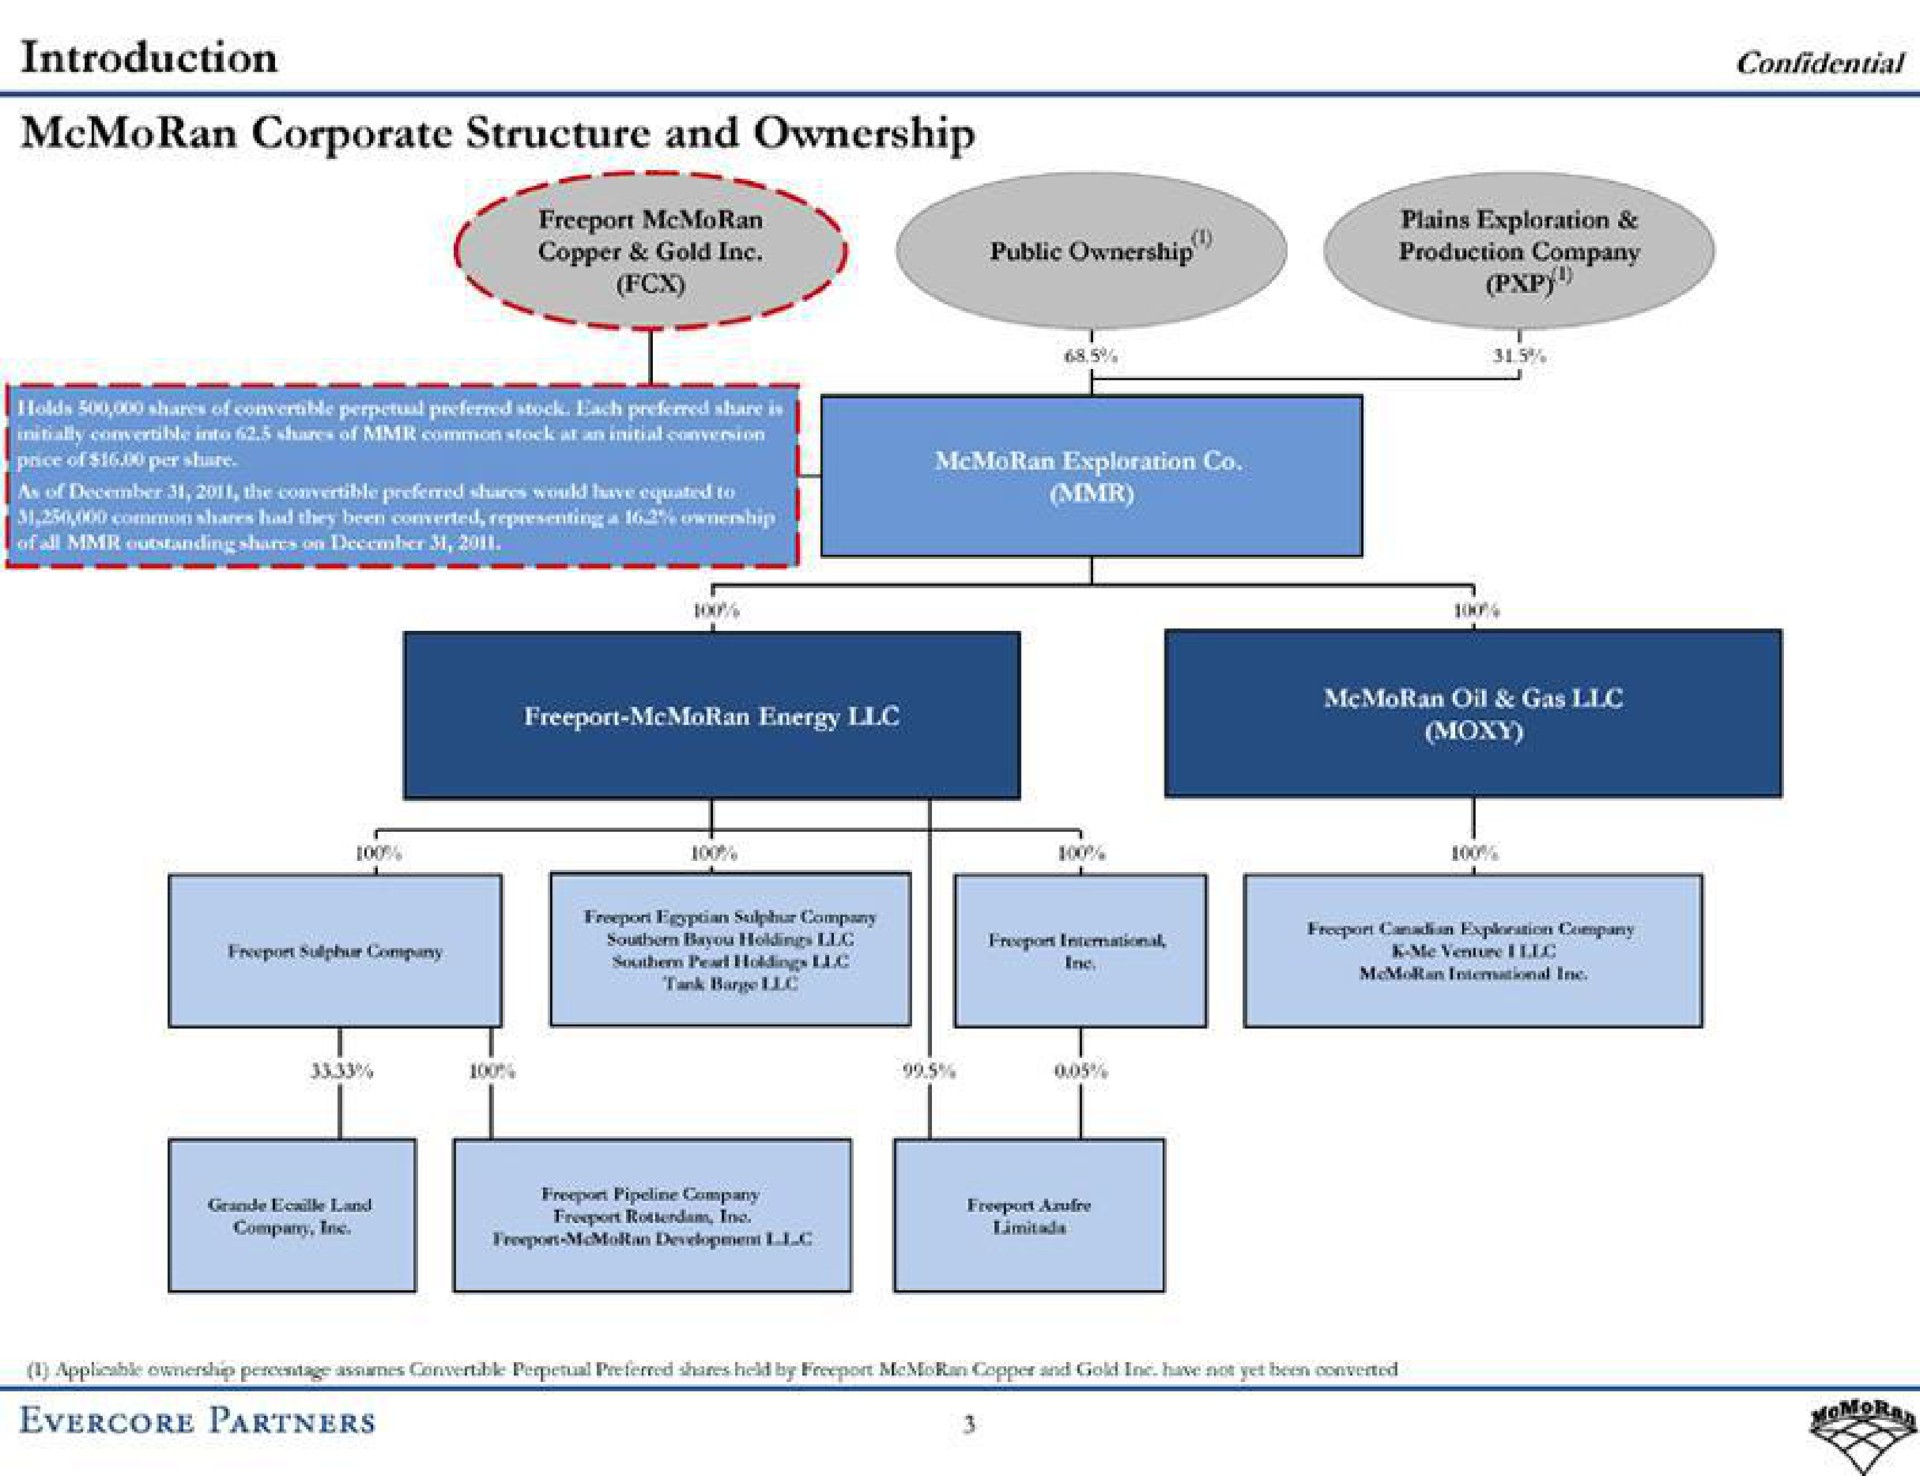 corporate structure and ownership partners | Evercore